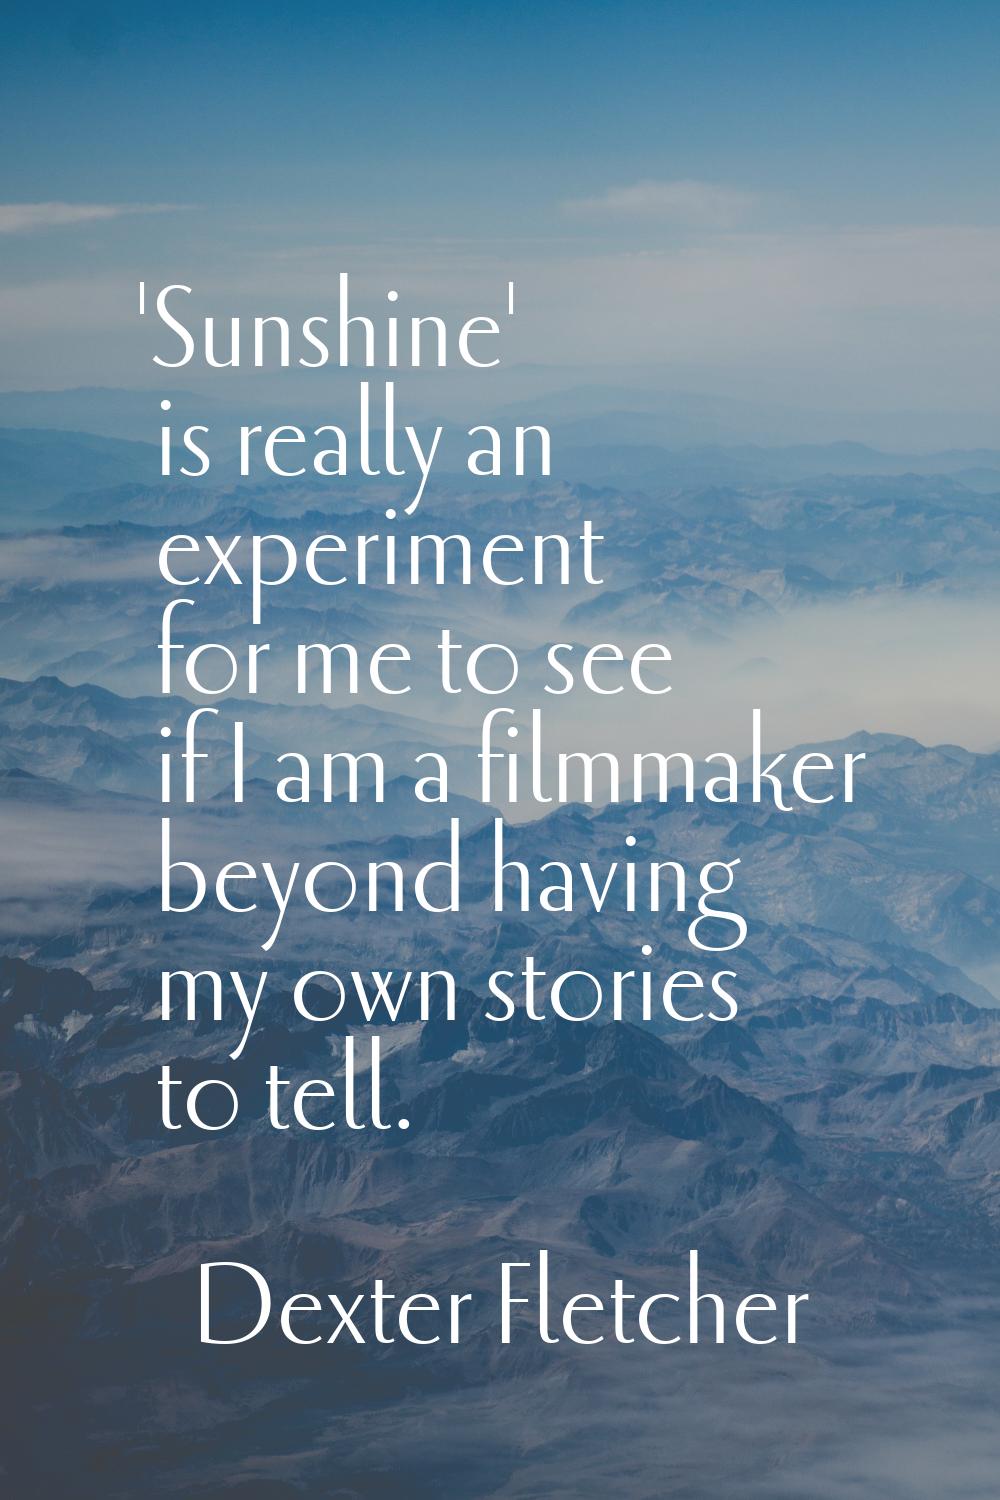 'Sunshine' is really an experiment for me to see if I am a filmmaker beyond having my own stories t